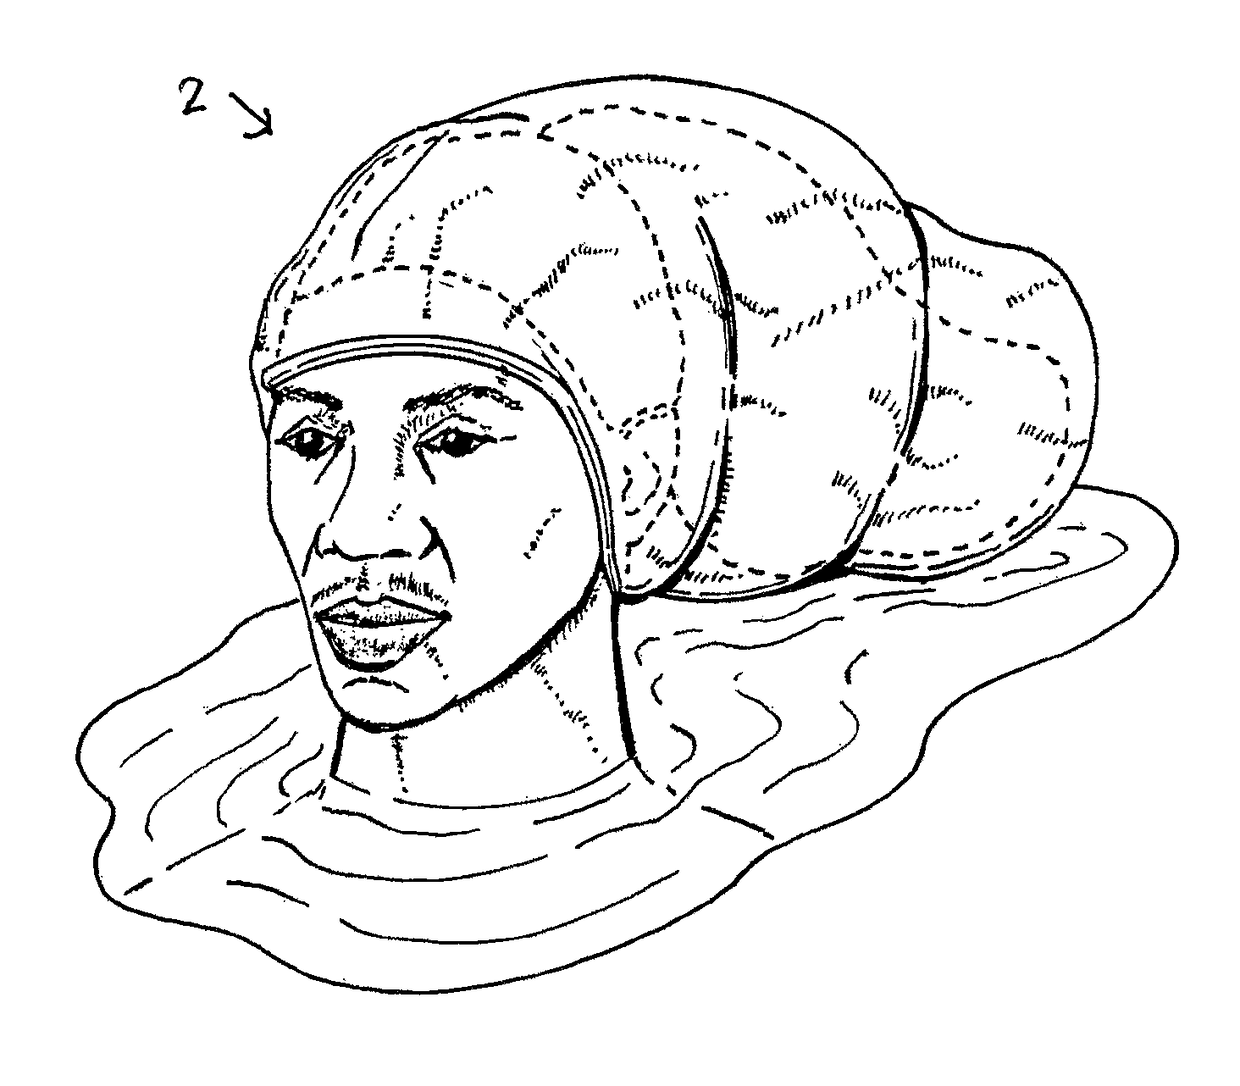 Swim cap for persons with long hair